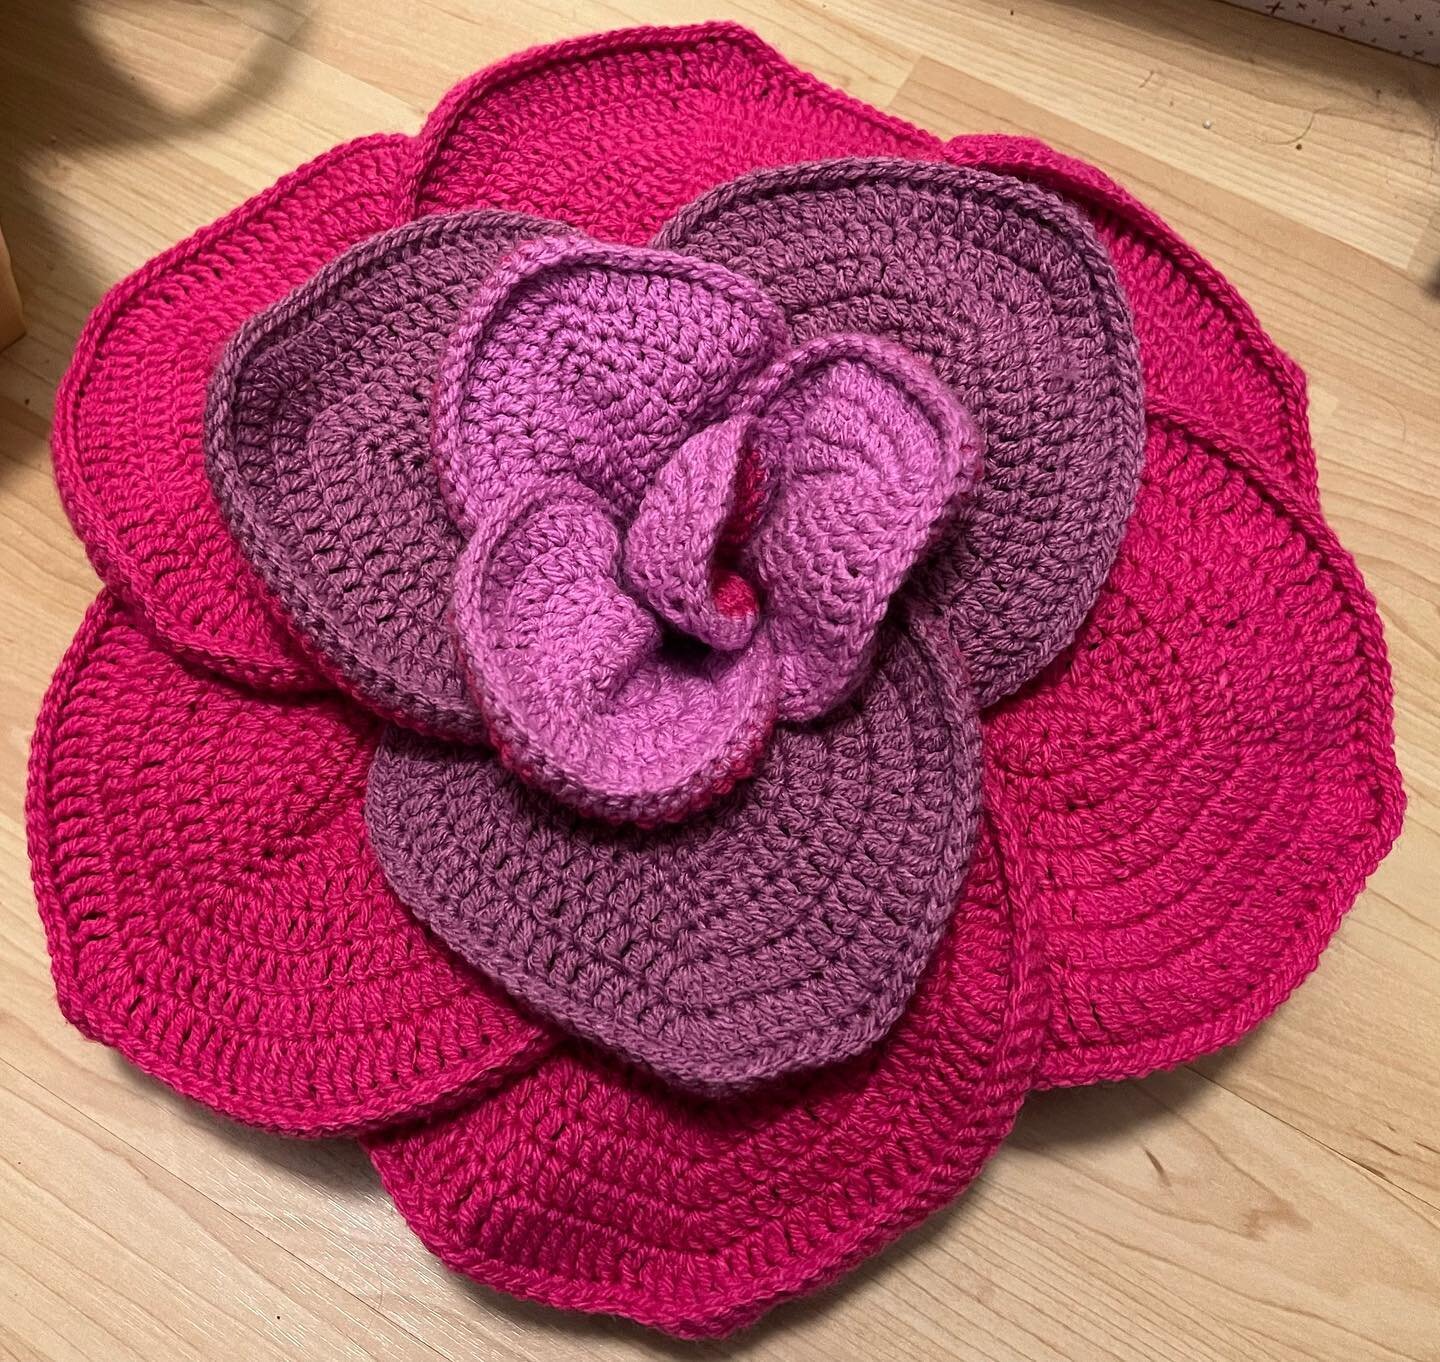 Crocheted a rose pillow. Not sure what happens between the pattern and end result but I&rsquo;m always feeling it could be better. But still, this is fine.